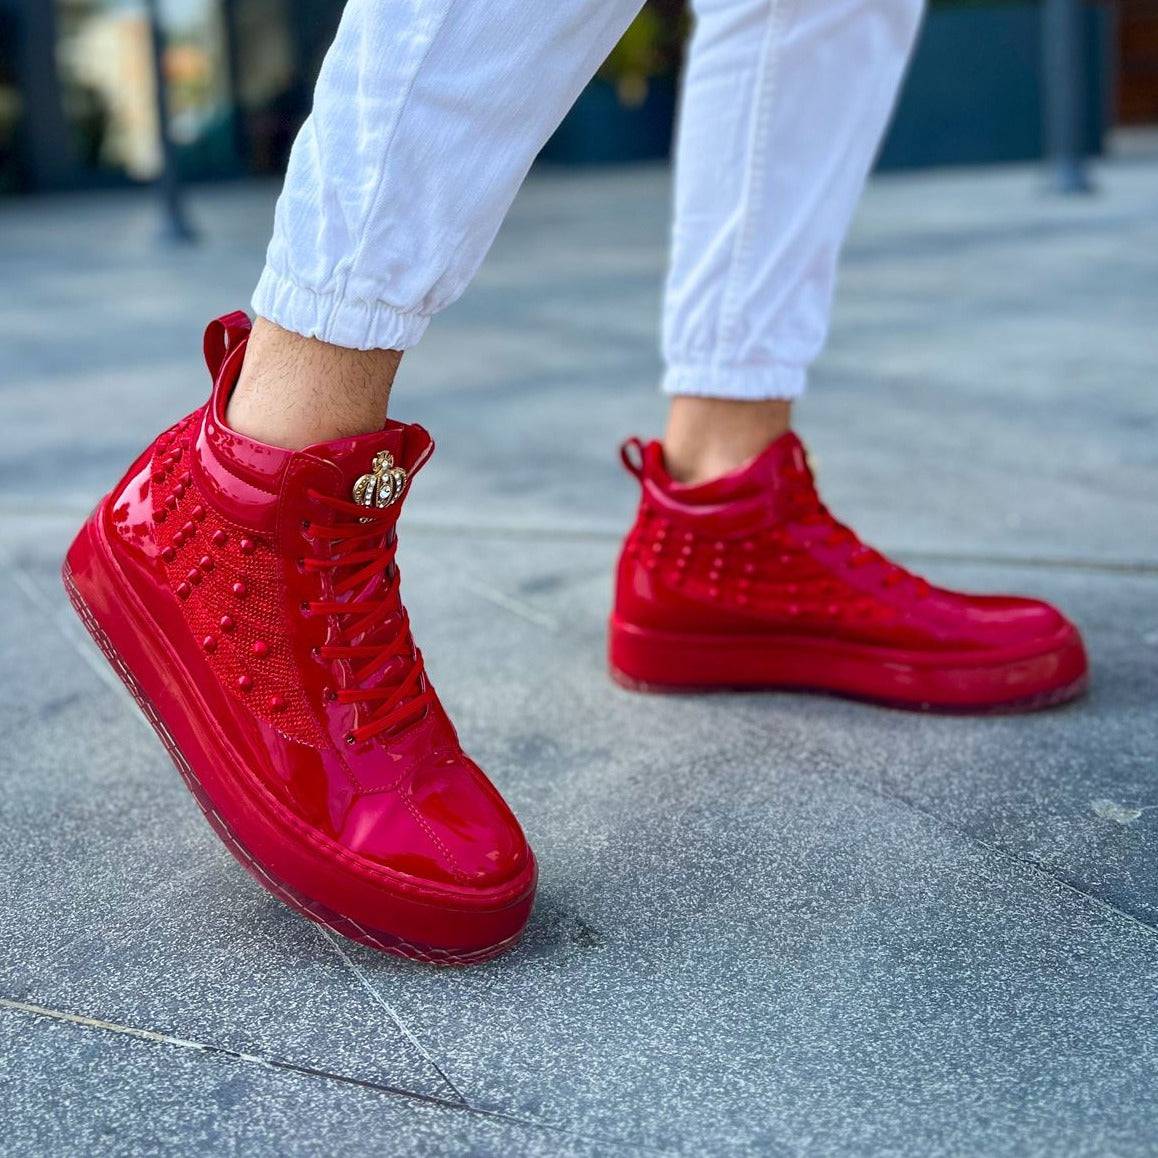 Men's Royal in All Red